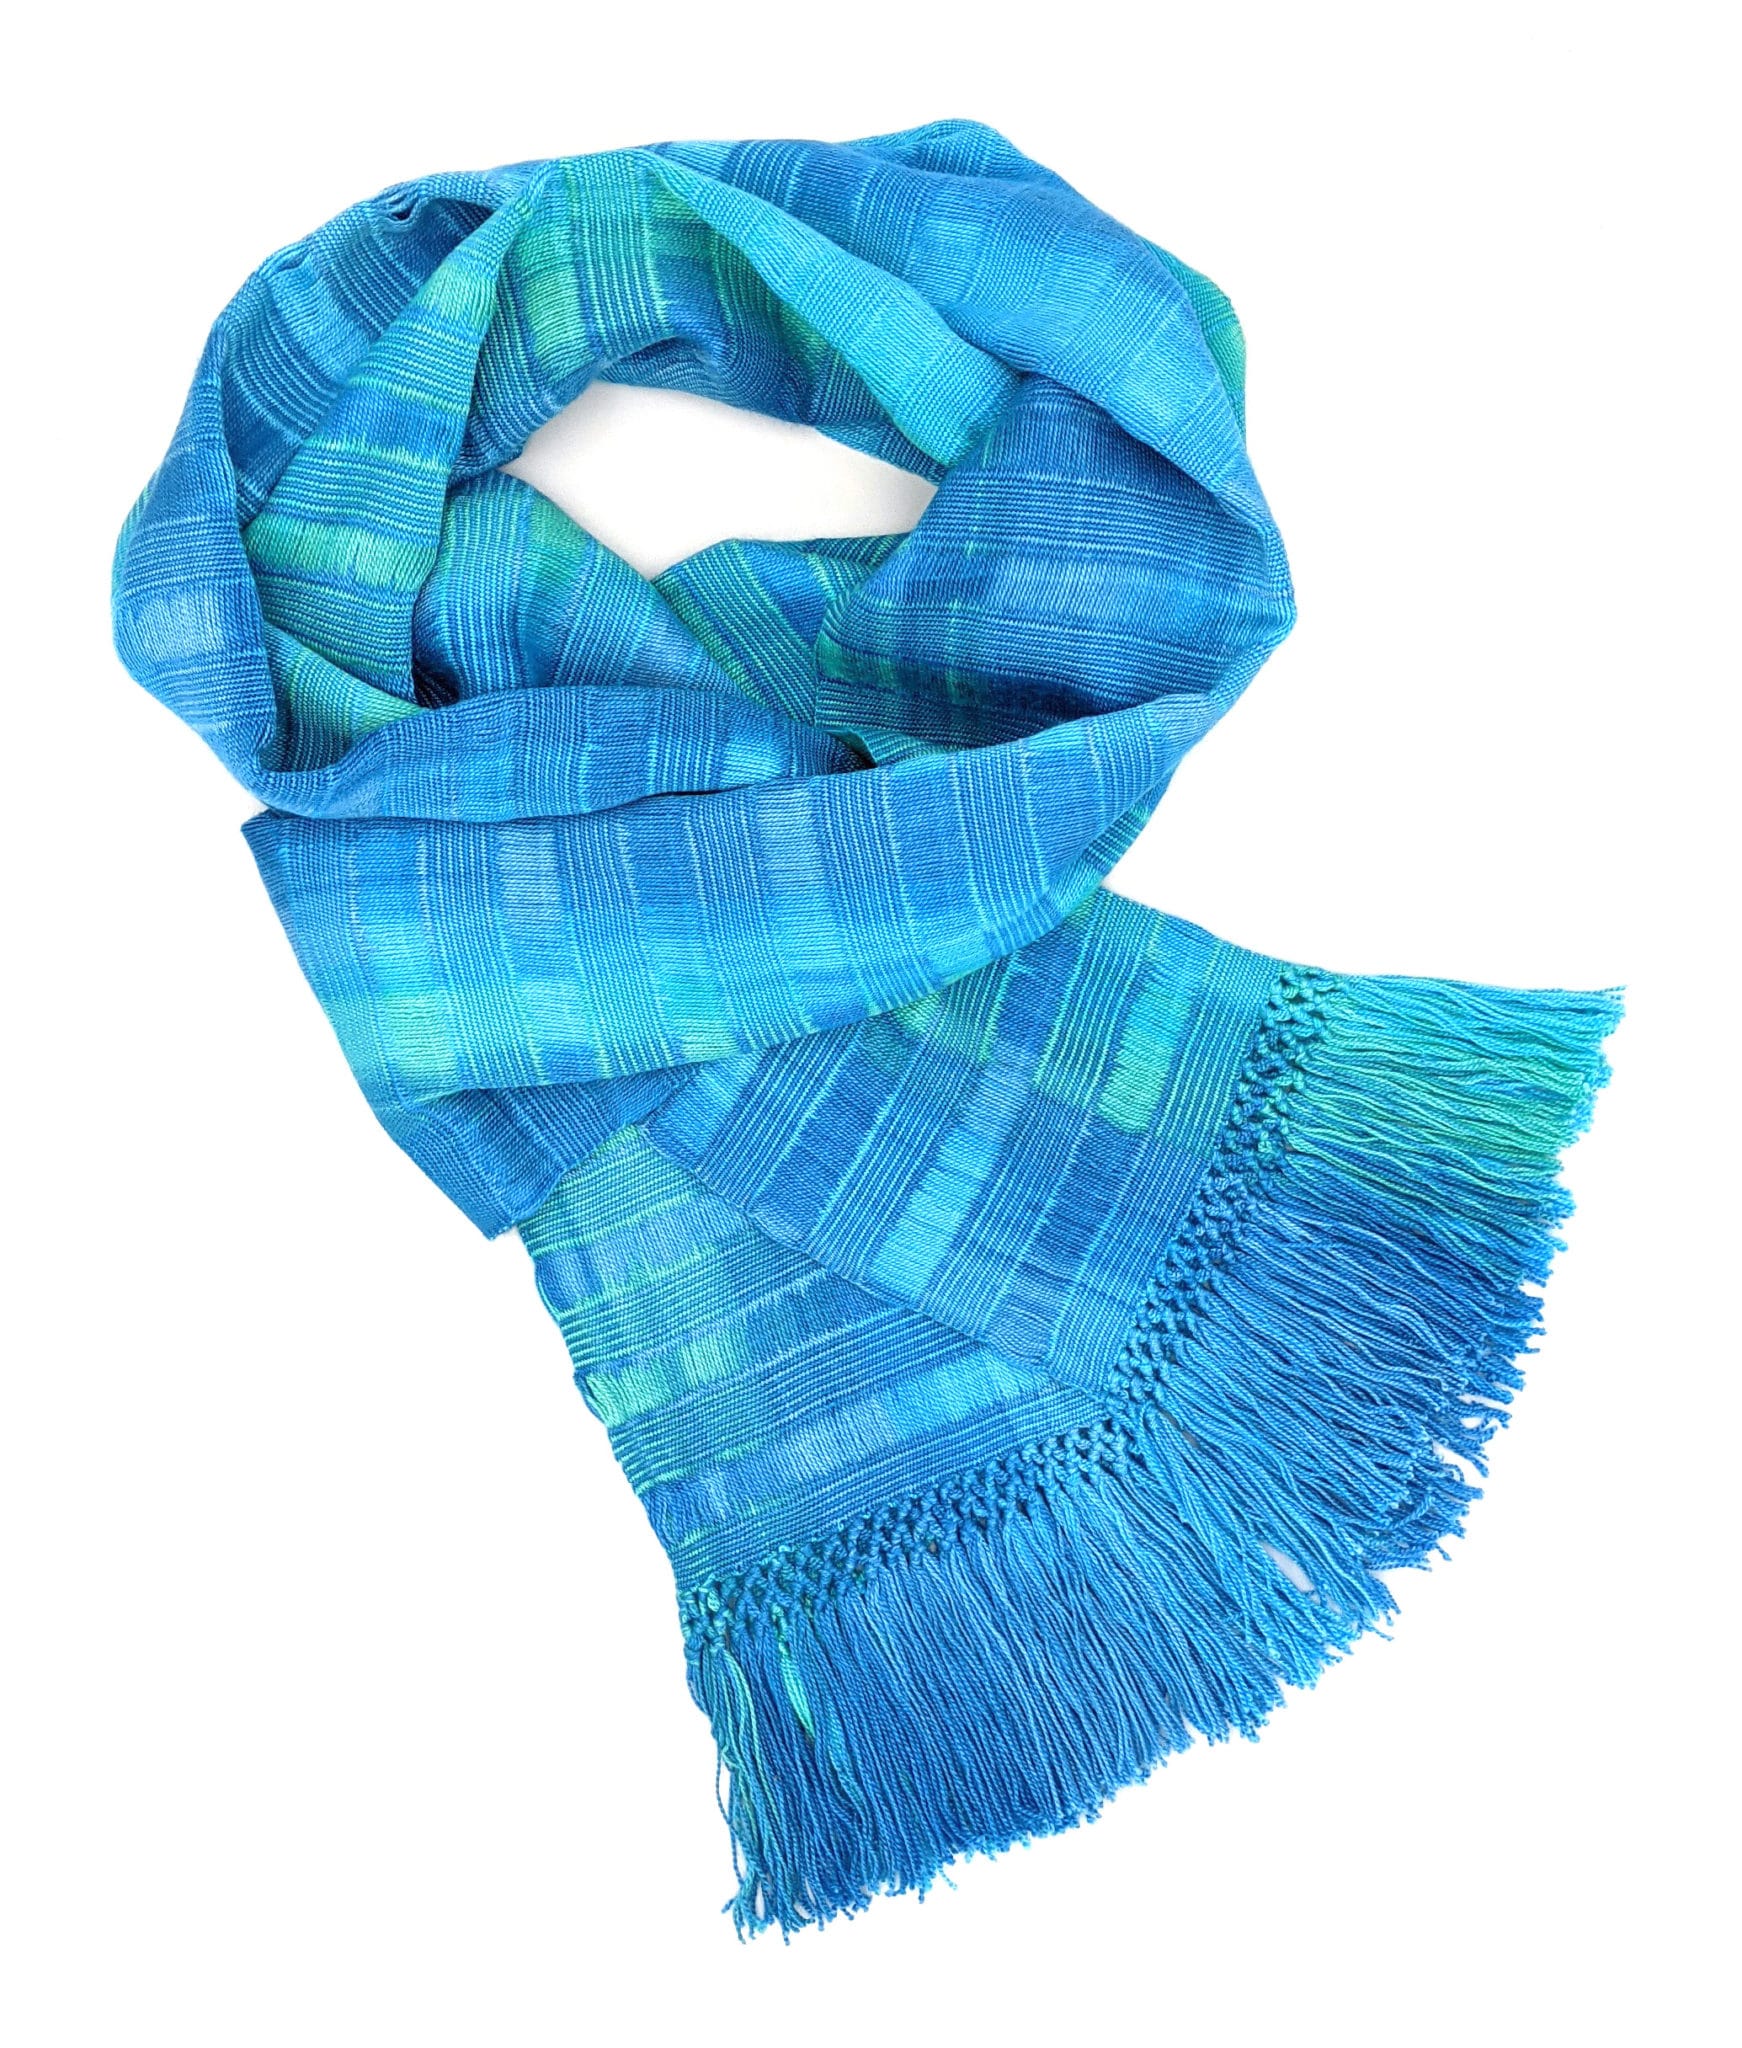 Turquoise, Celestial Blues - Lightweight Bamboo Open-Weave  Handwoven Scarf 8 x 68